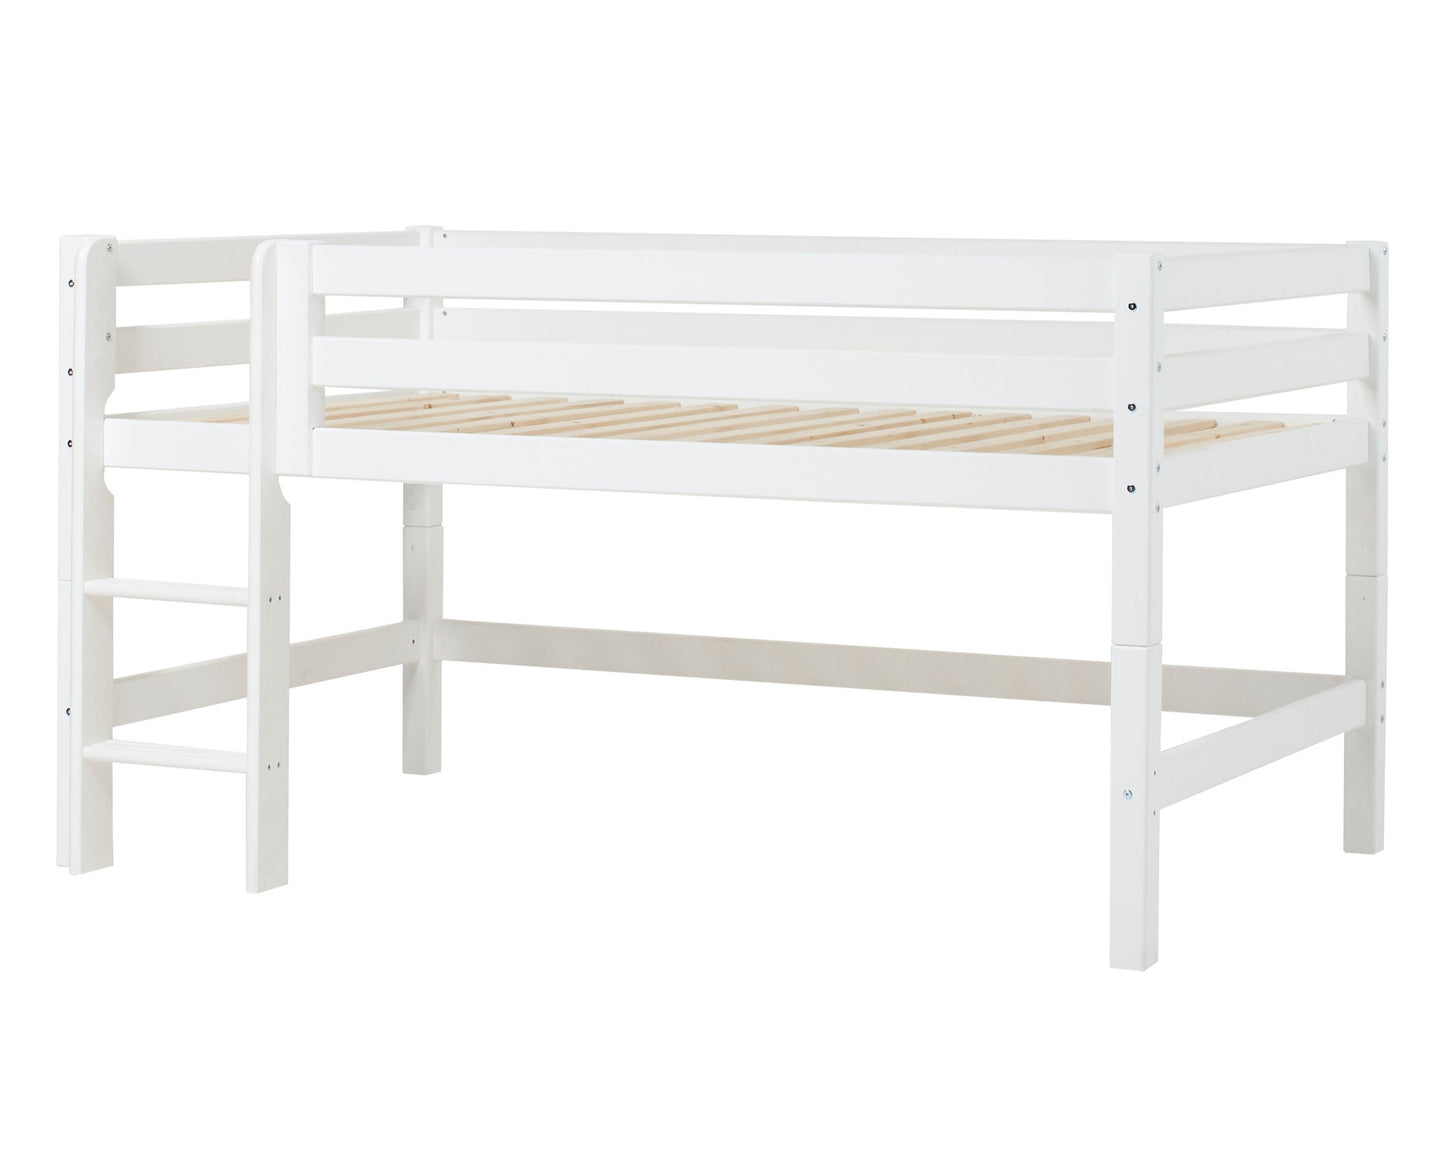 ECO Luxury - Module for half high bed - 90x200 cm - white